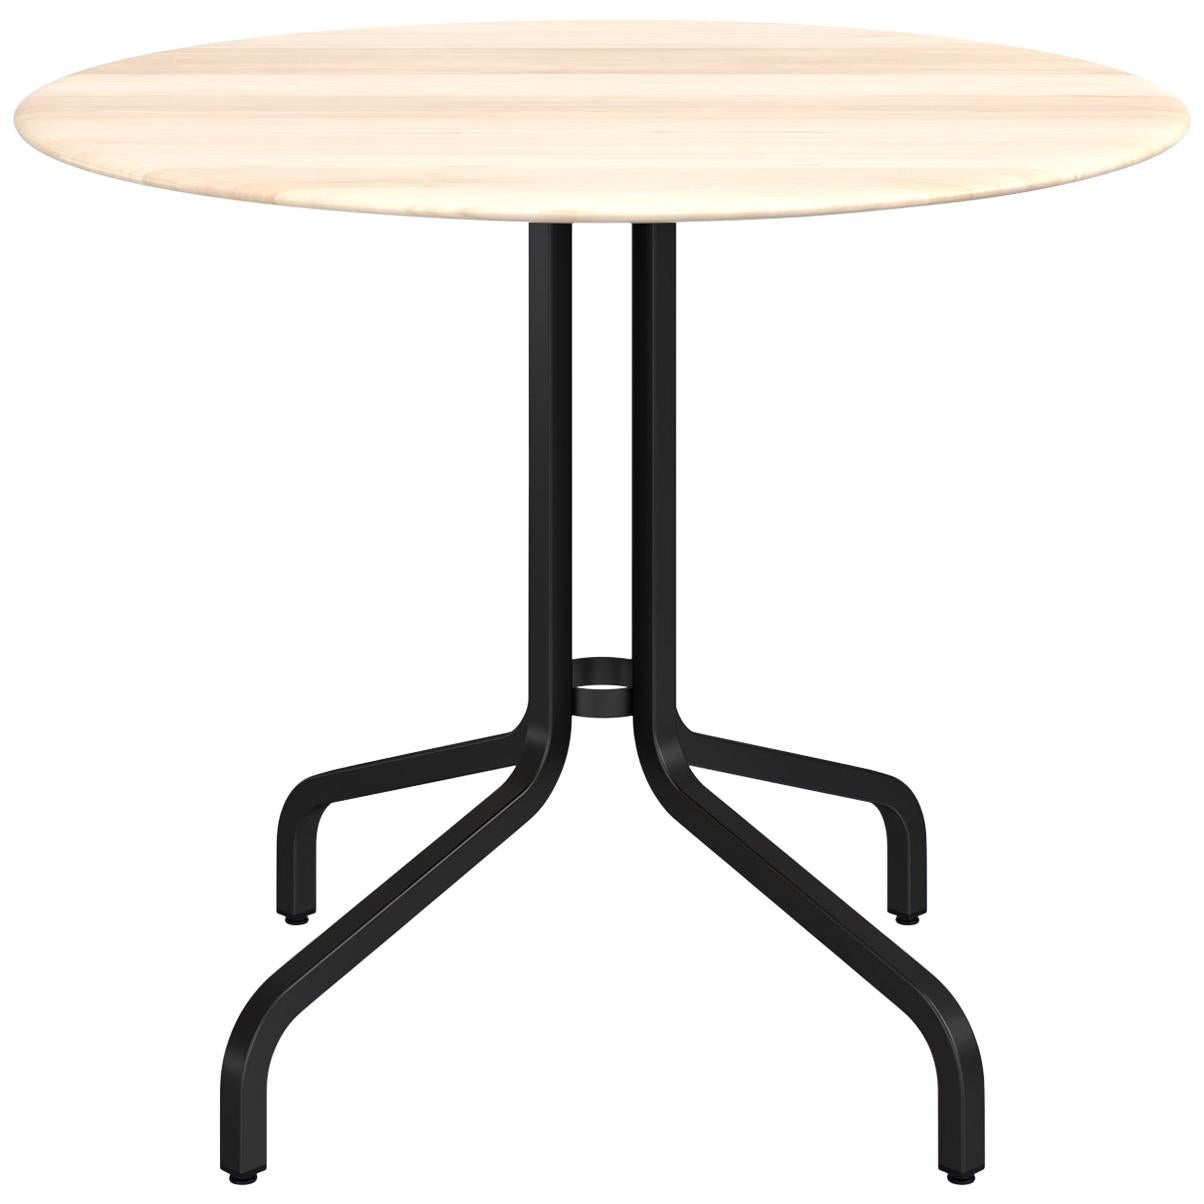 Emeco 1 Inch Round Cafe Table with Black Legs & Wood Top by Jasper Morrison For Sale